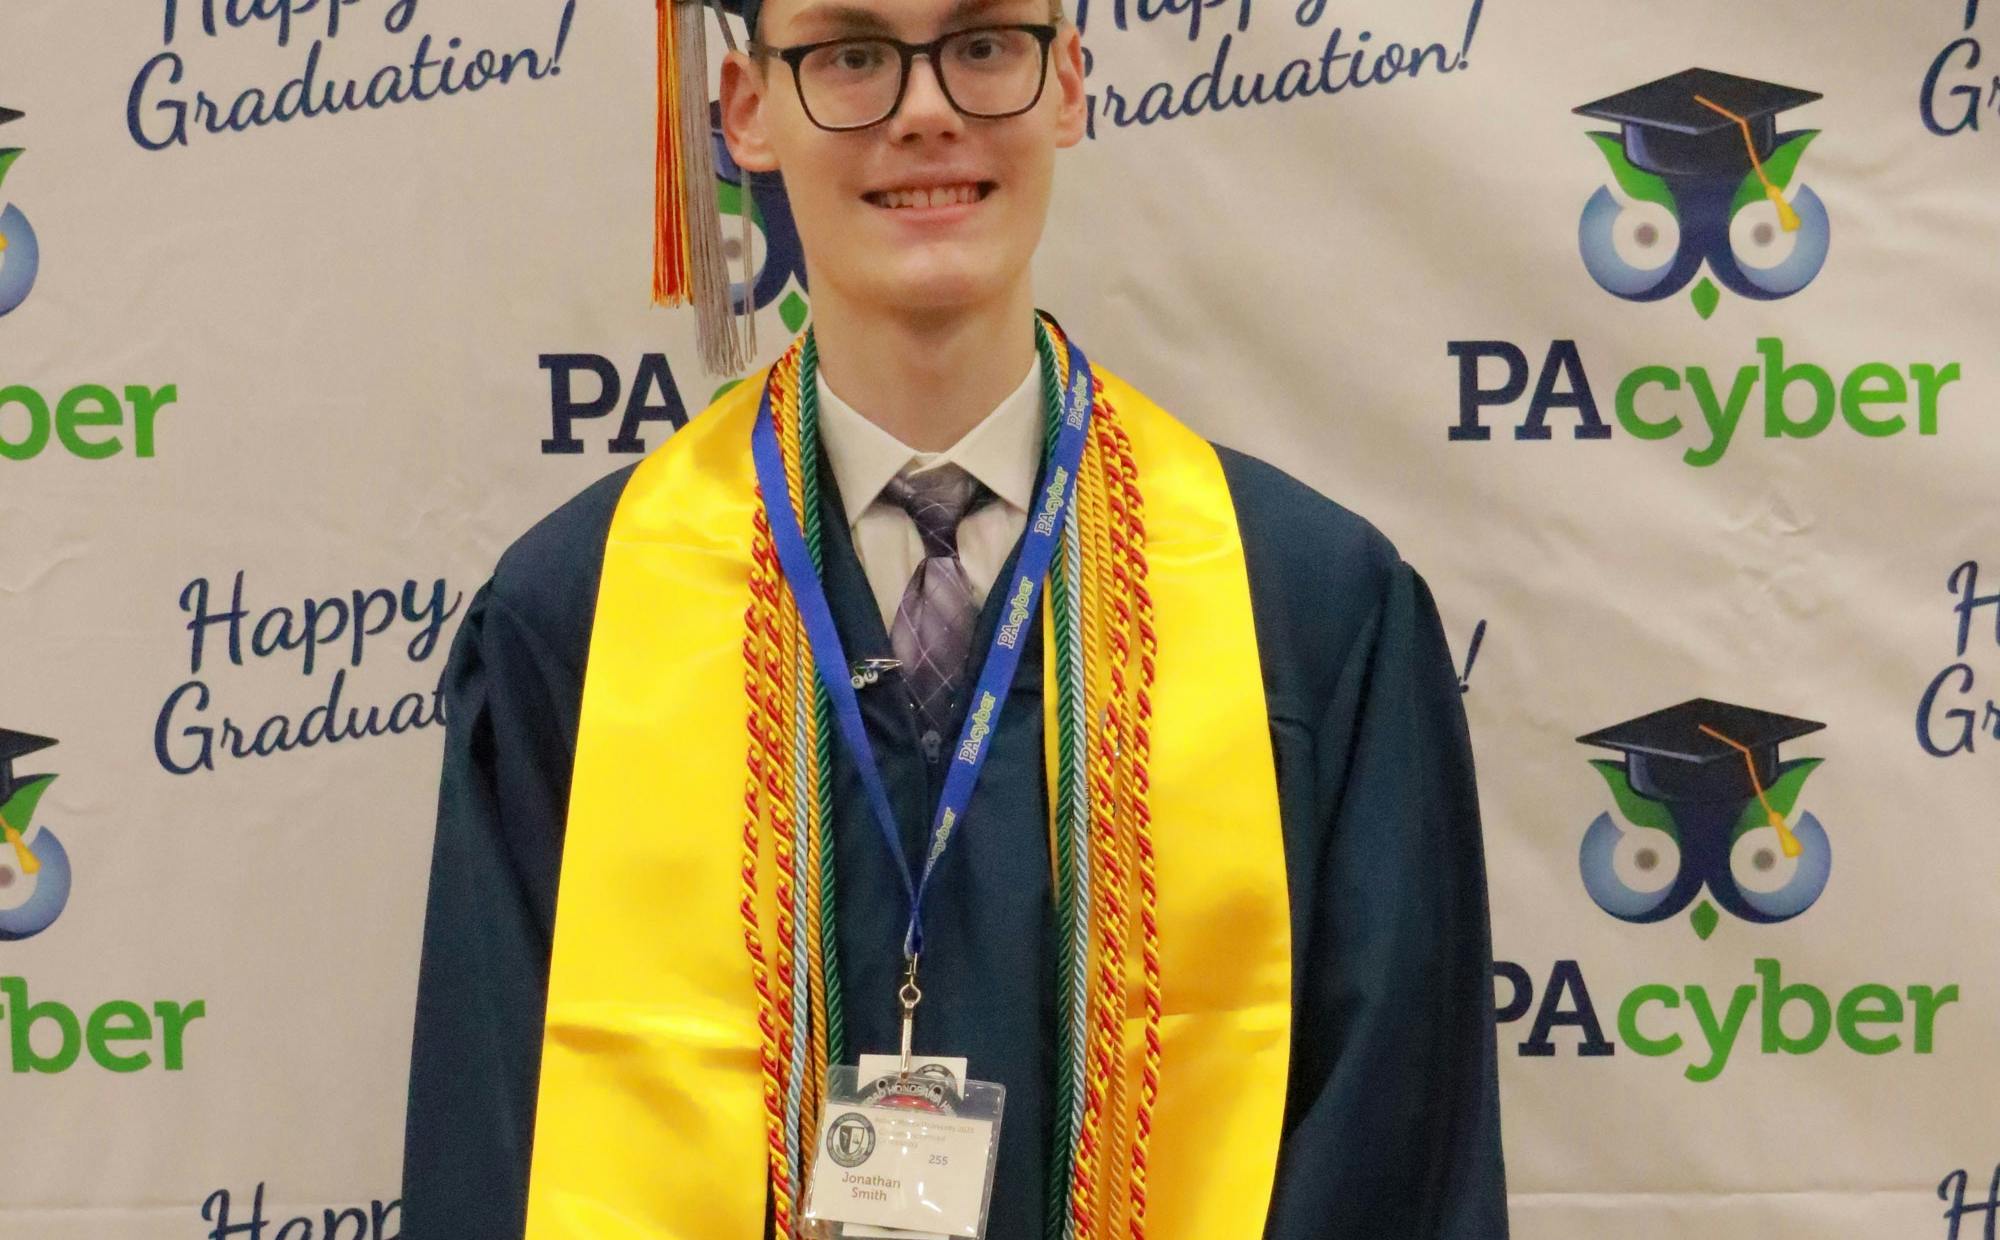 PA Cyber graduate wears cap and gown and several colorful cords.